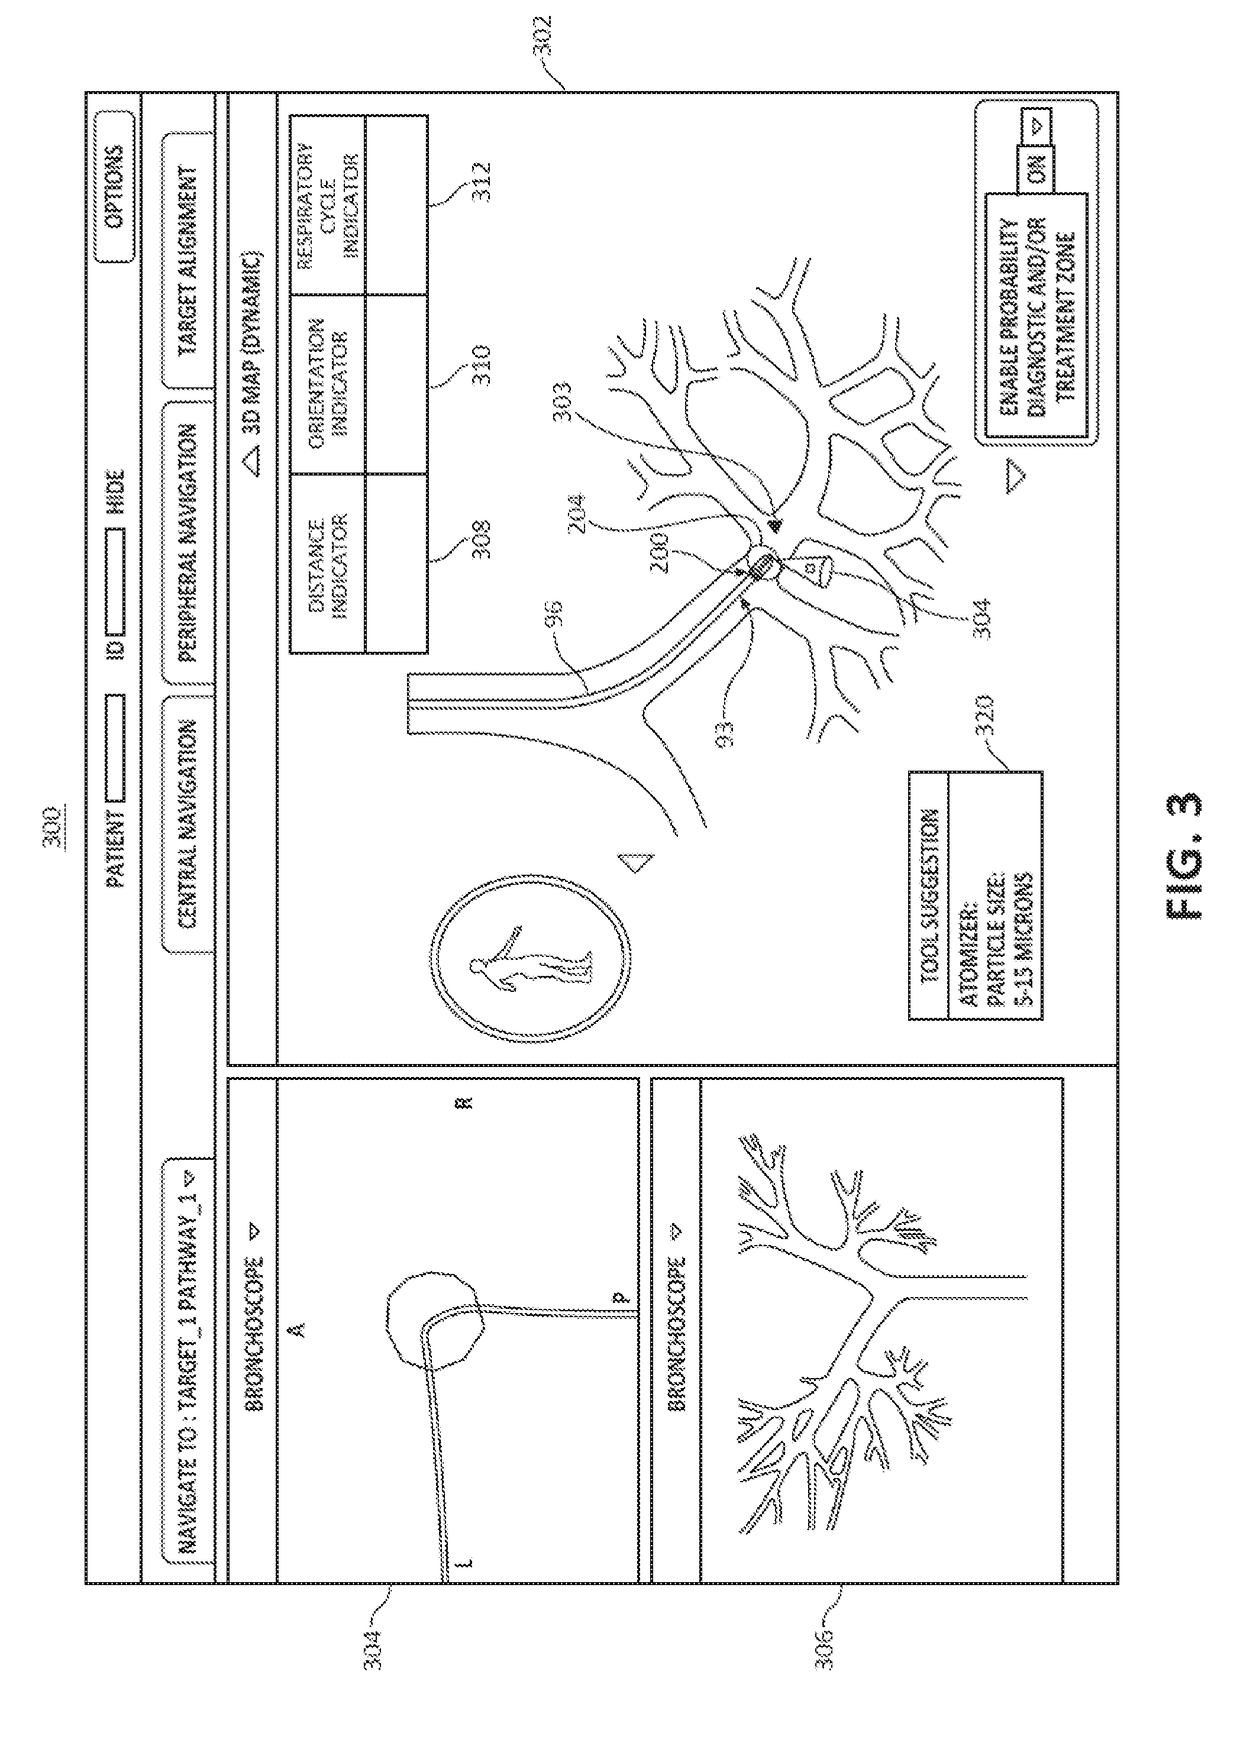 Systems and methods for navigational bronchoscopy and selective drug delivery